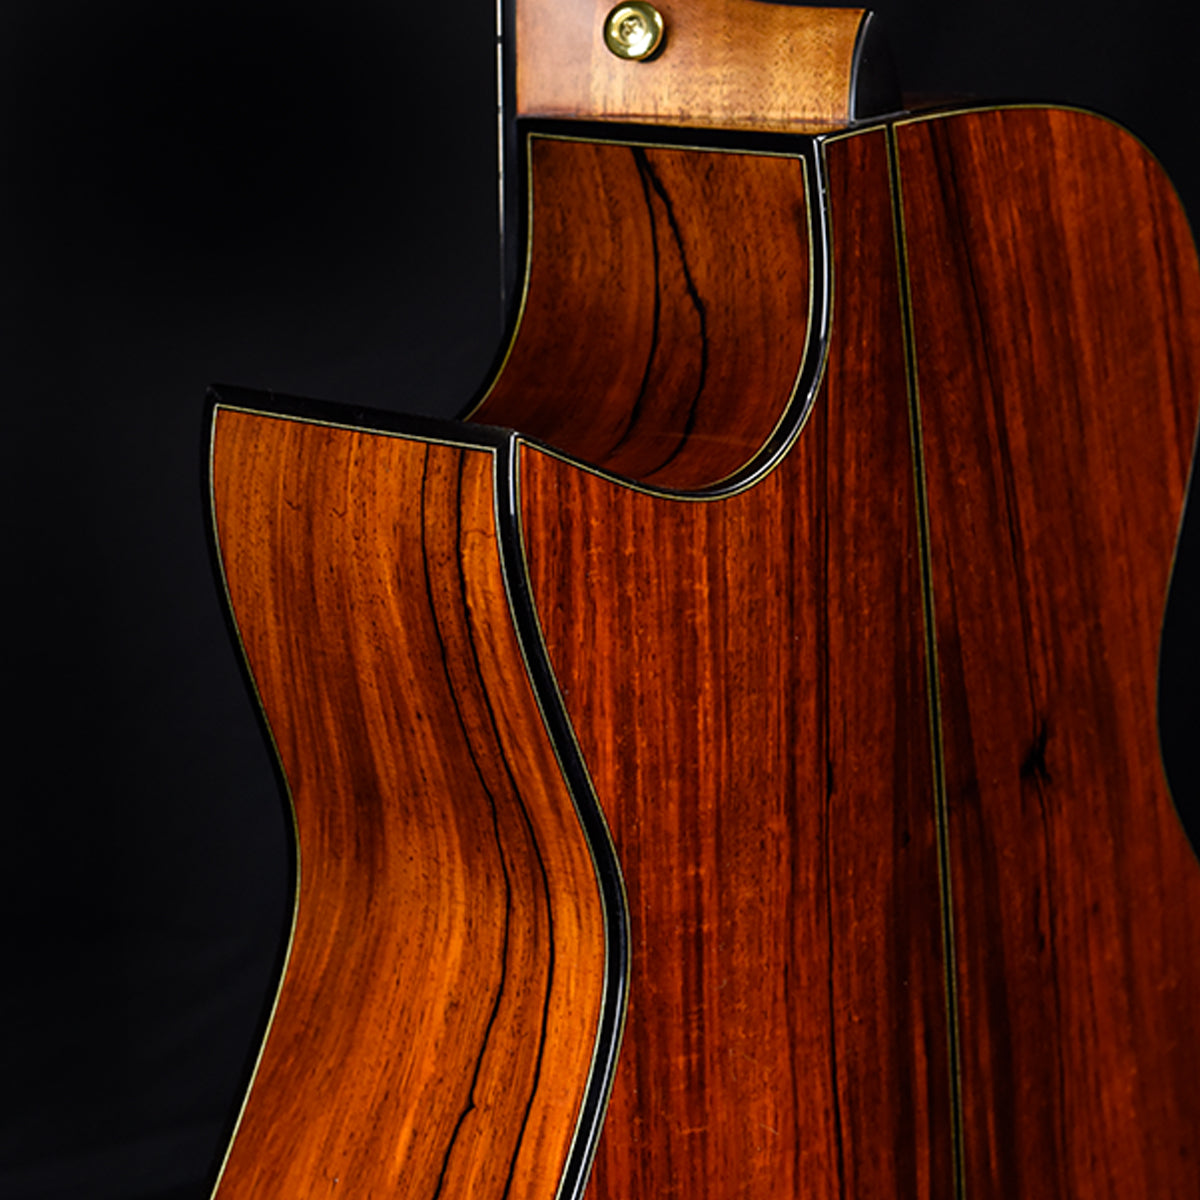 Blue Label OM Swiss Moon Spruce with Cocobolo | #216